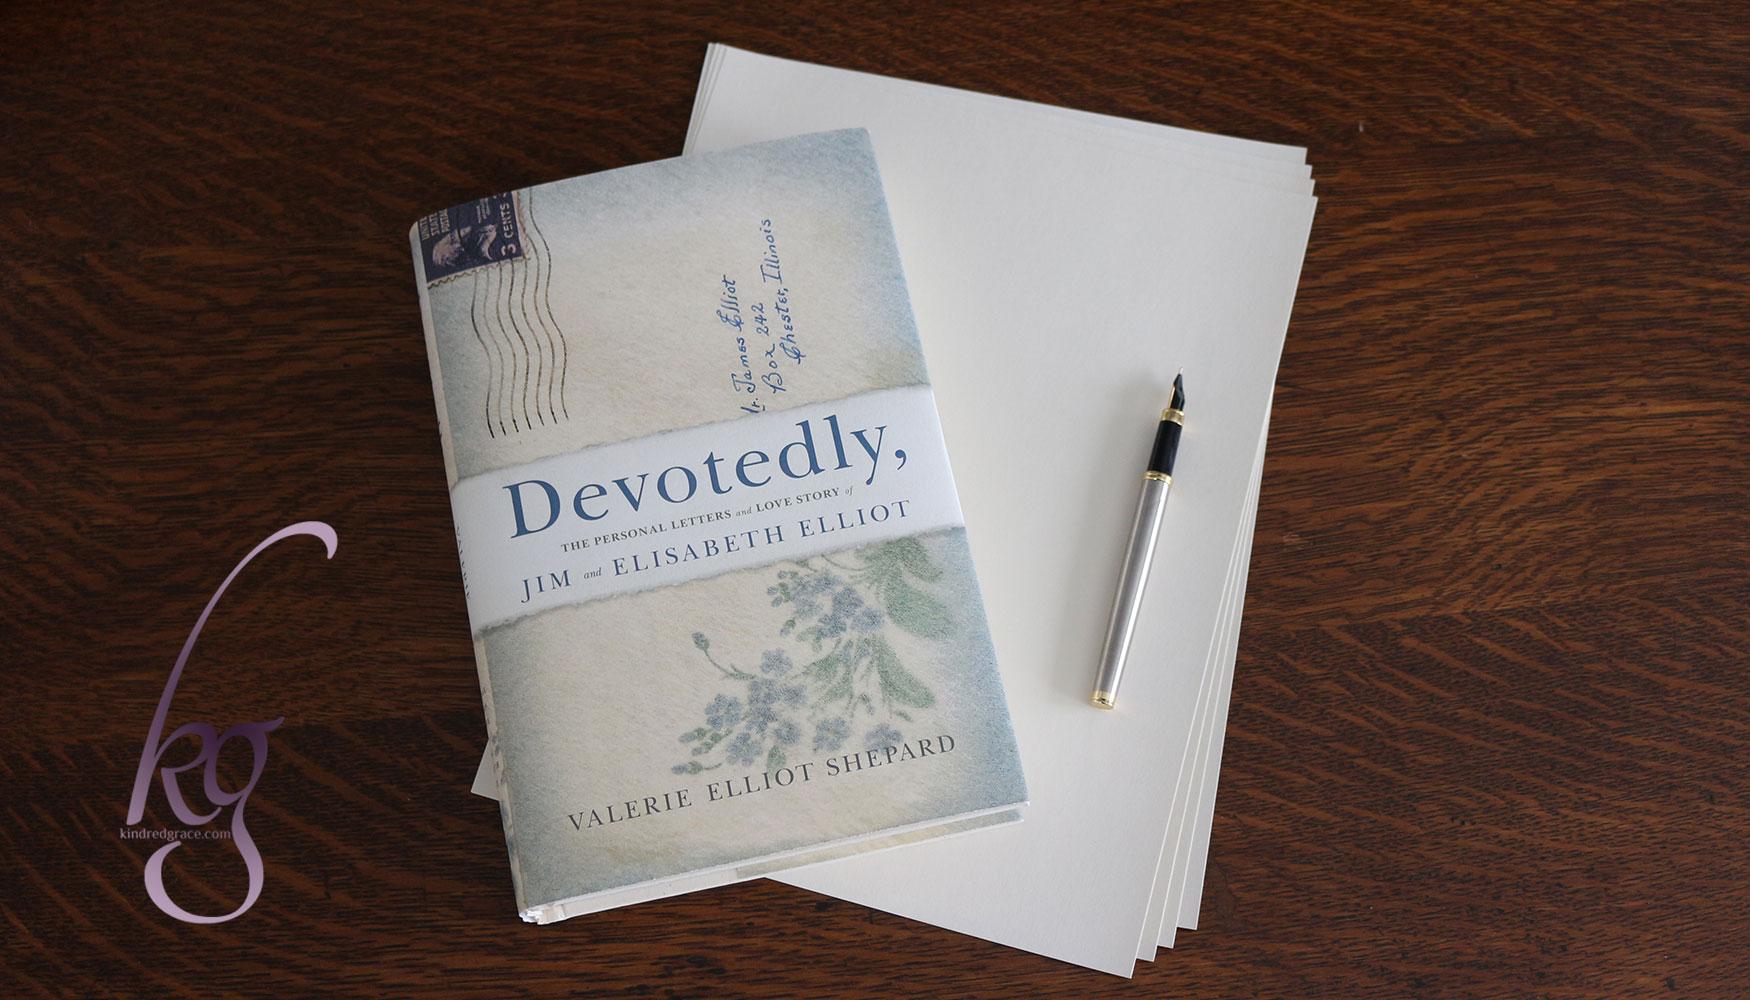 Devotedly: friendship, love, and the agony of waiting